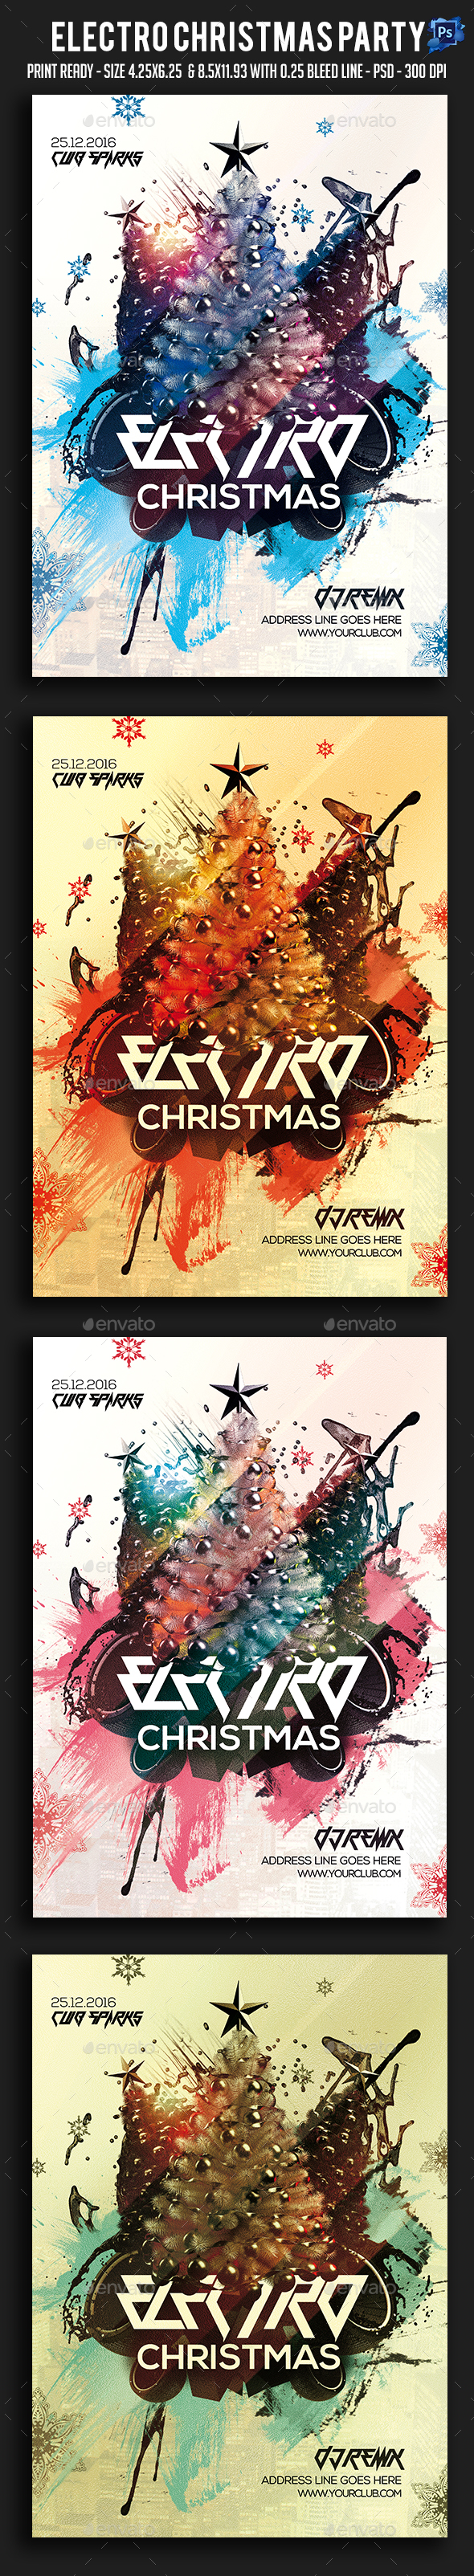 Electro Christmas Party Flyer